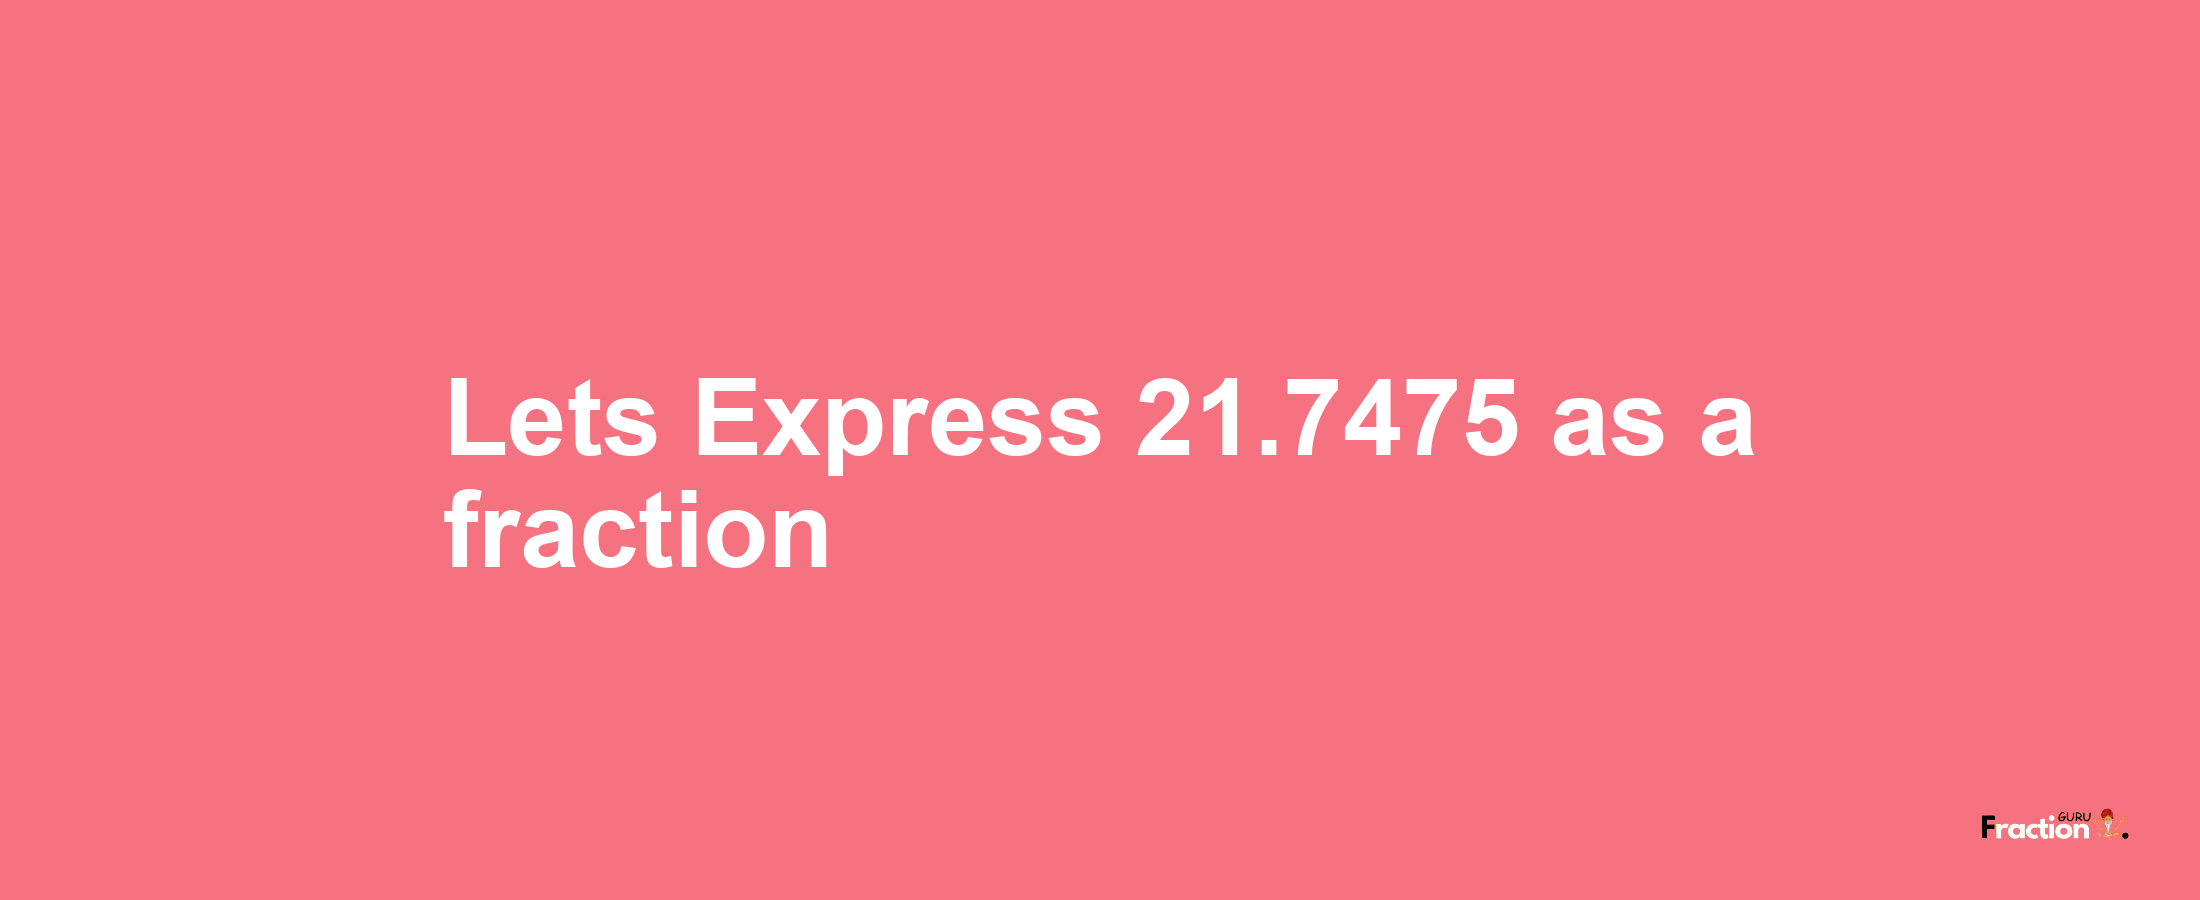 Lets Express 21.7475 as afraction